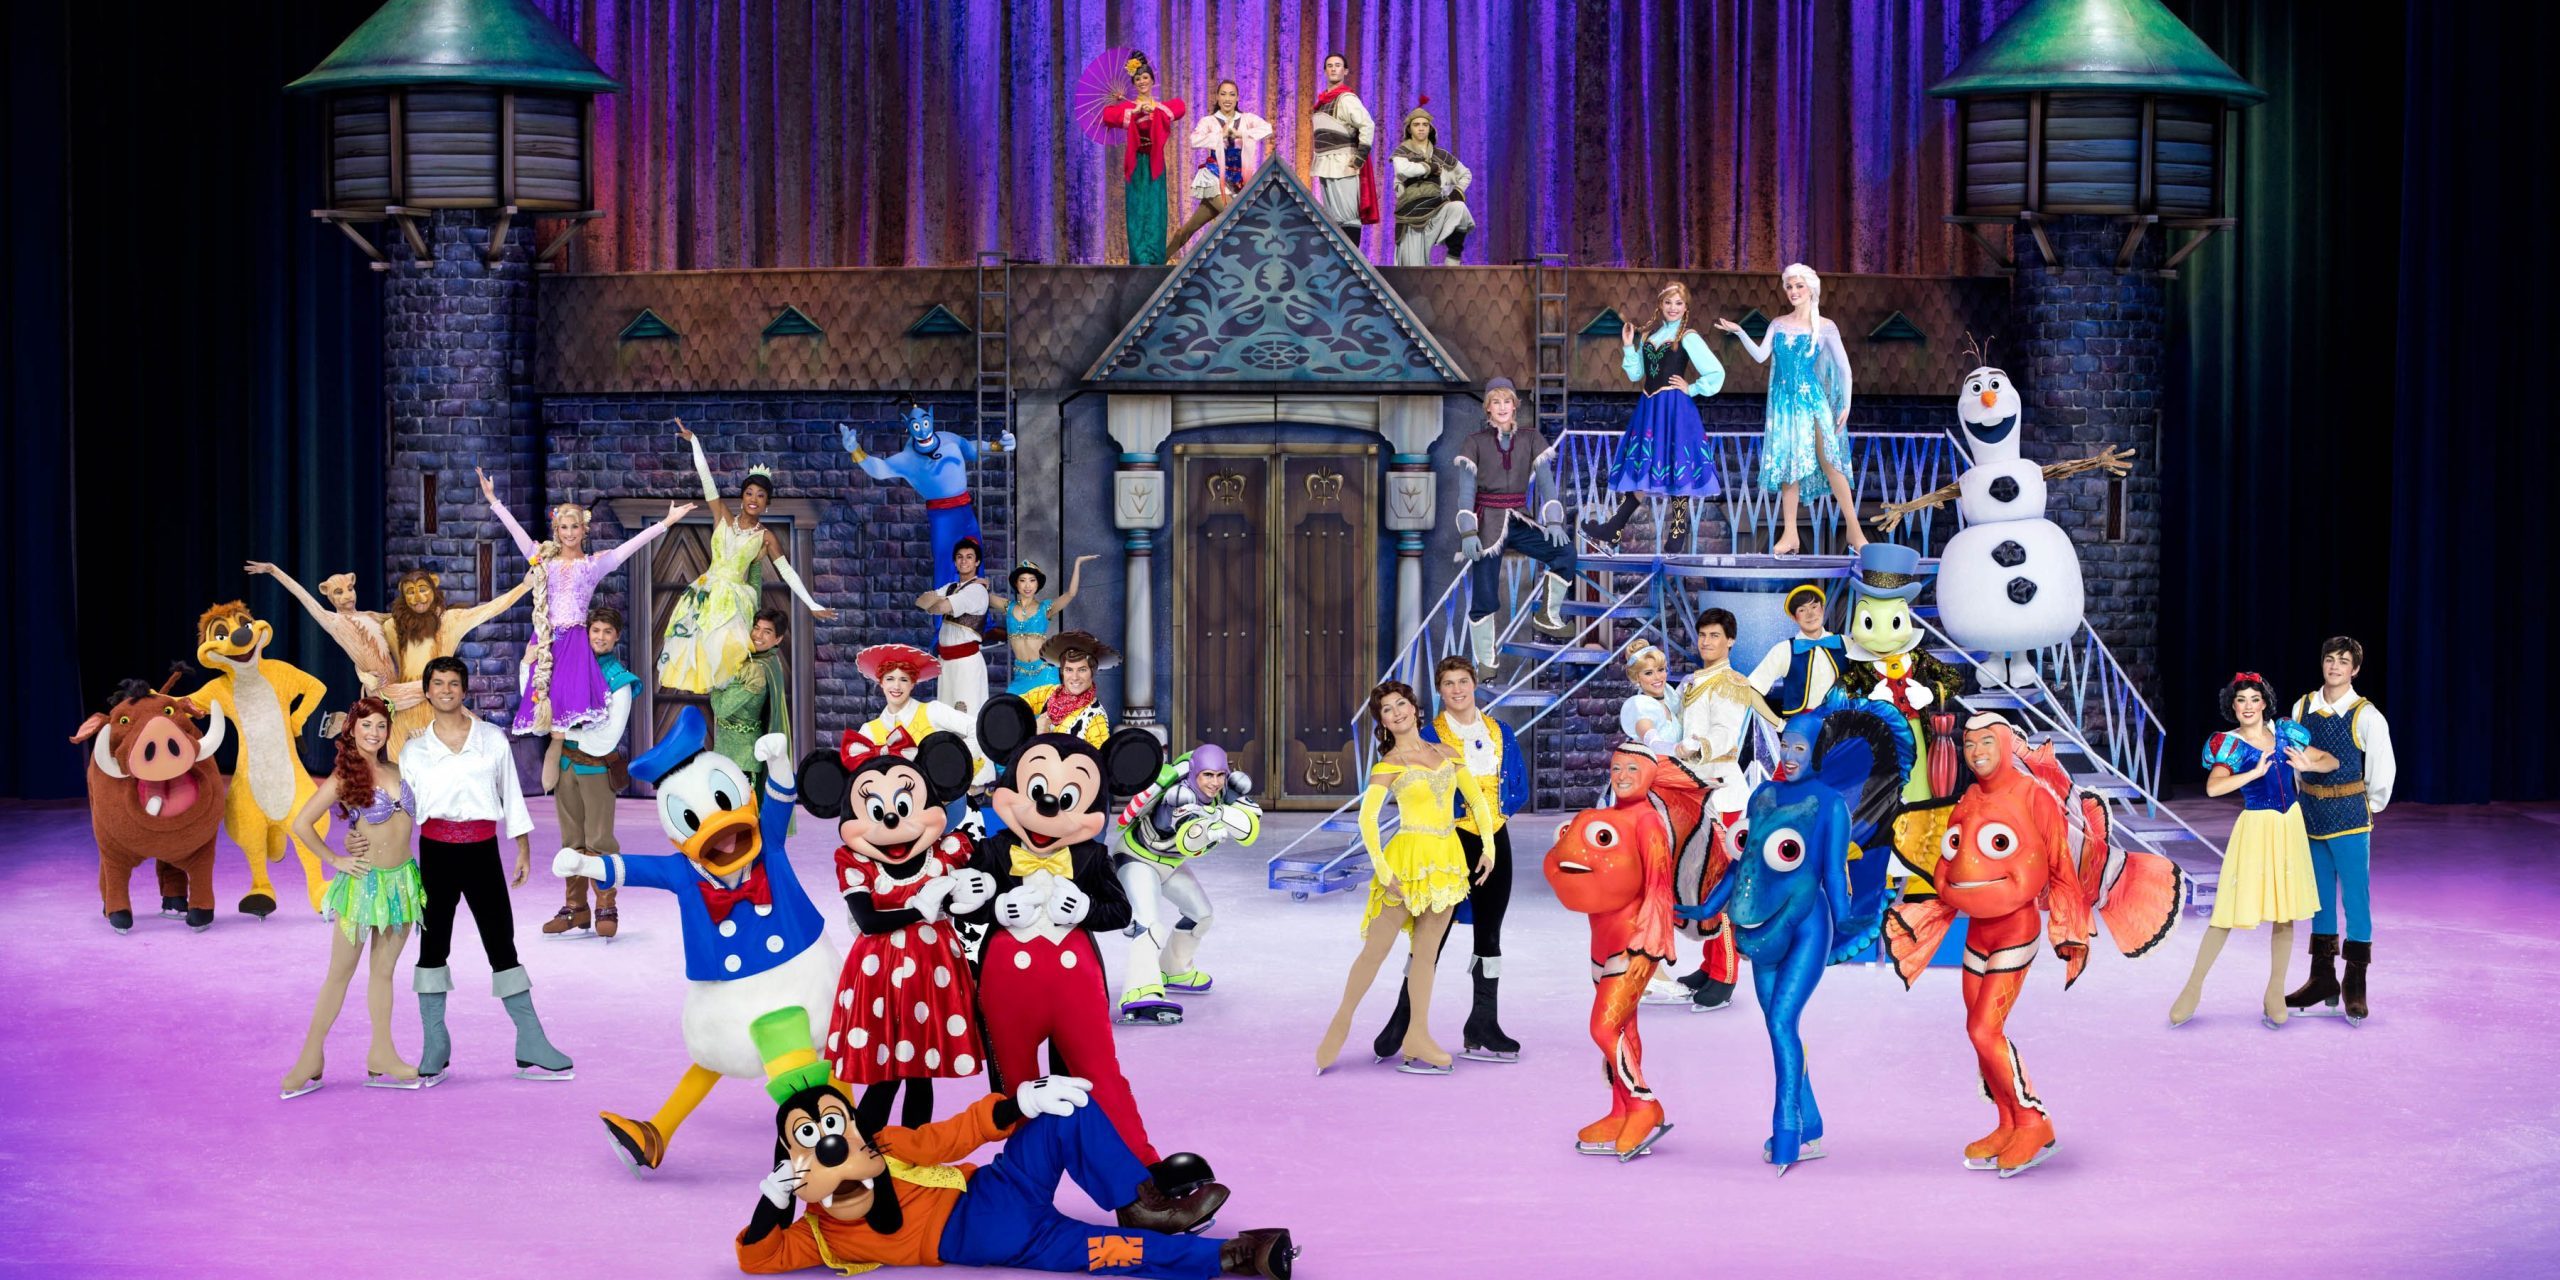 Disney on Ice returns to Hamilton with four more dates in 2022